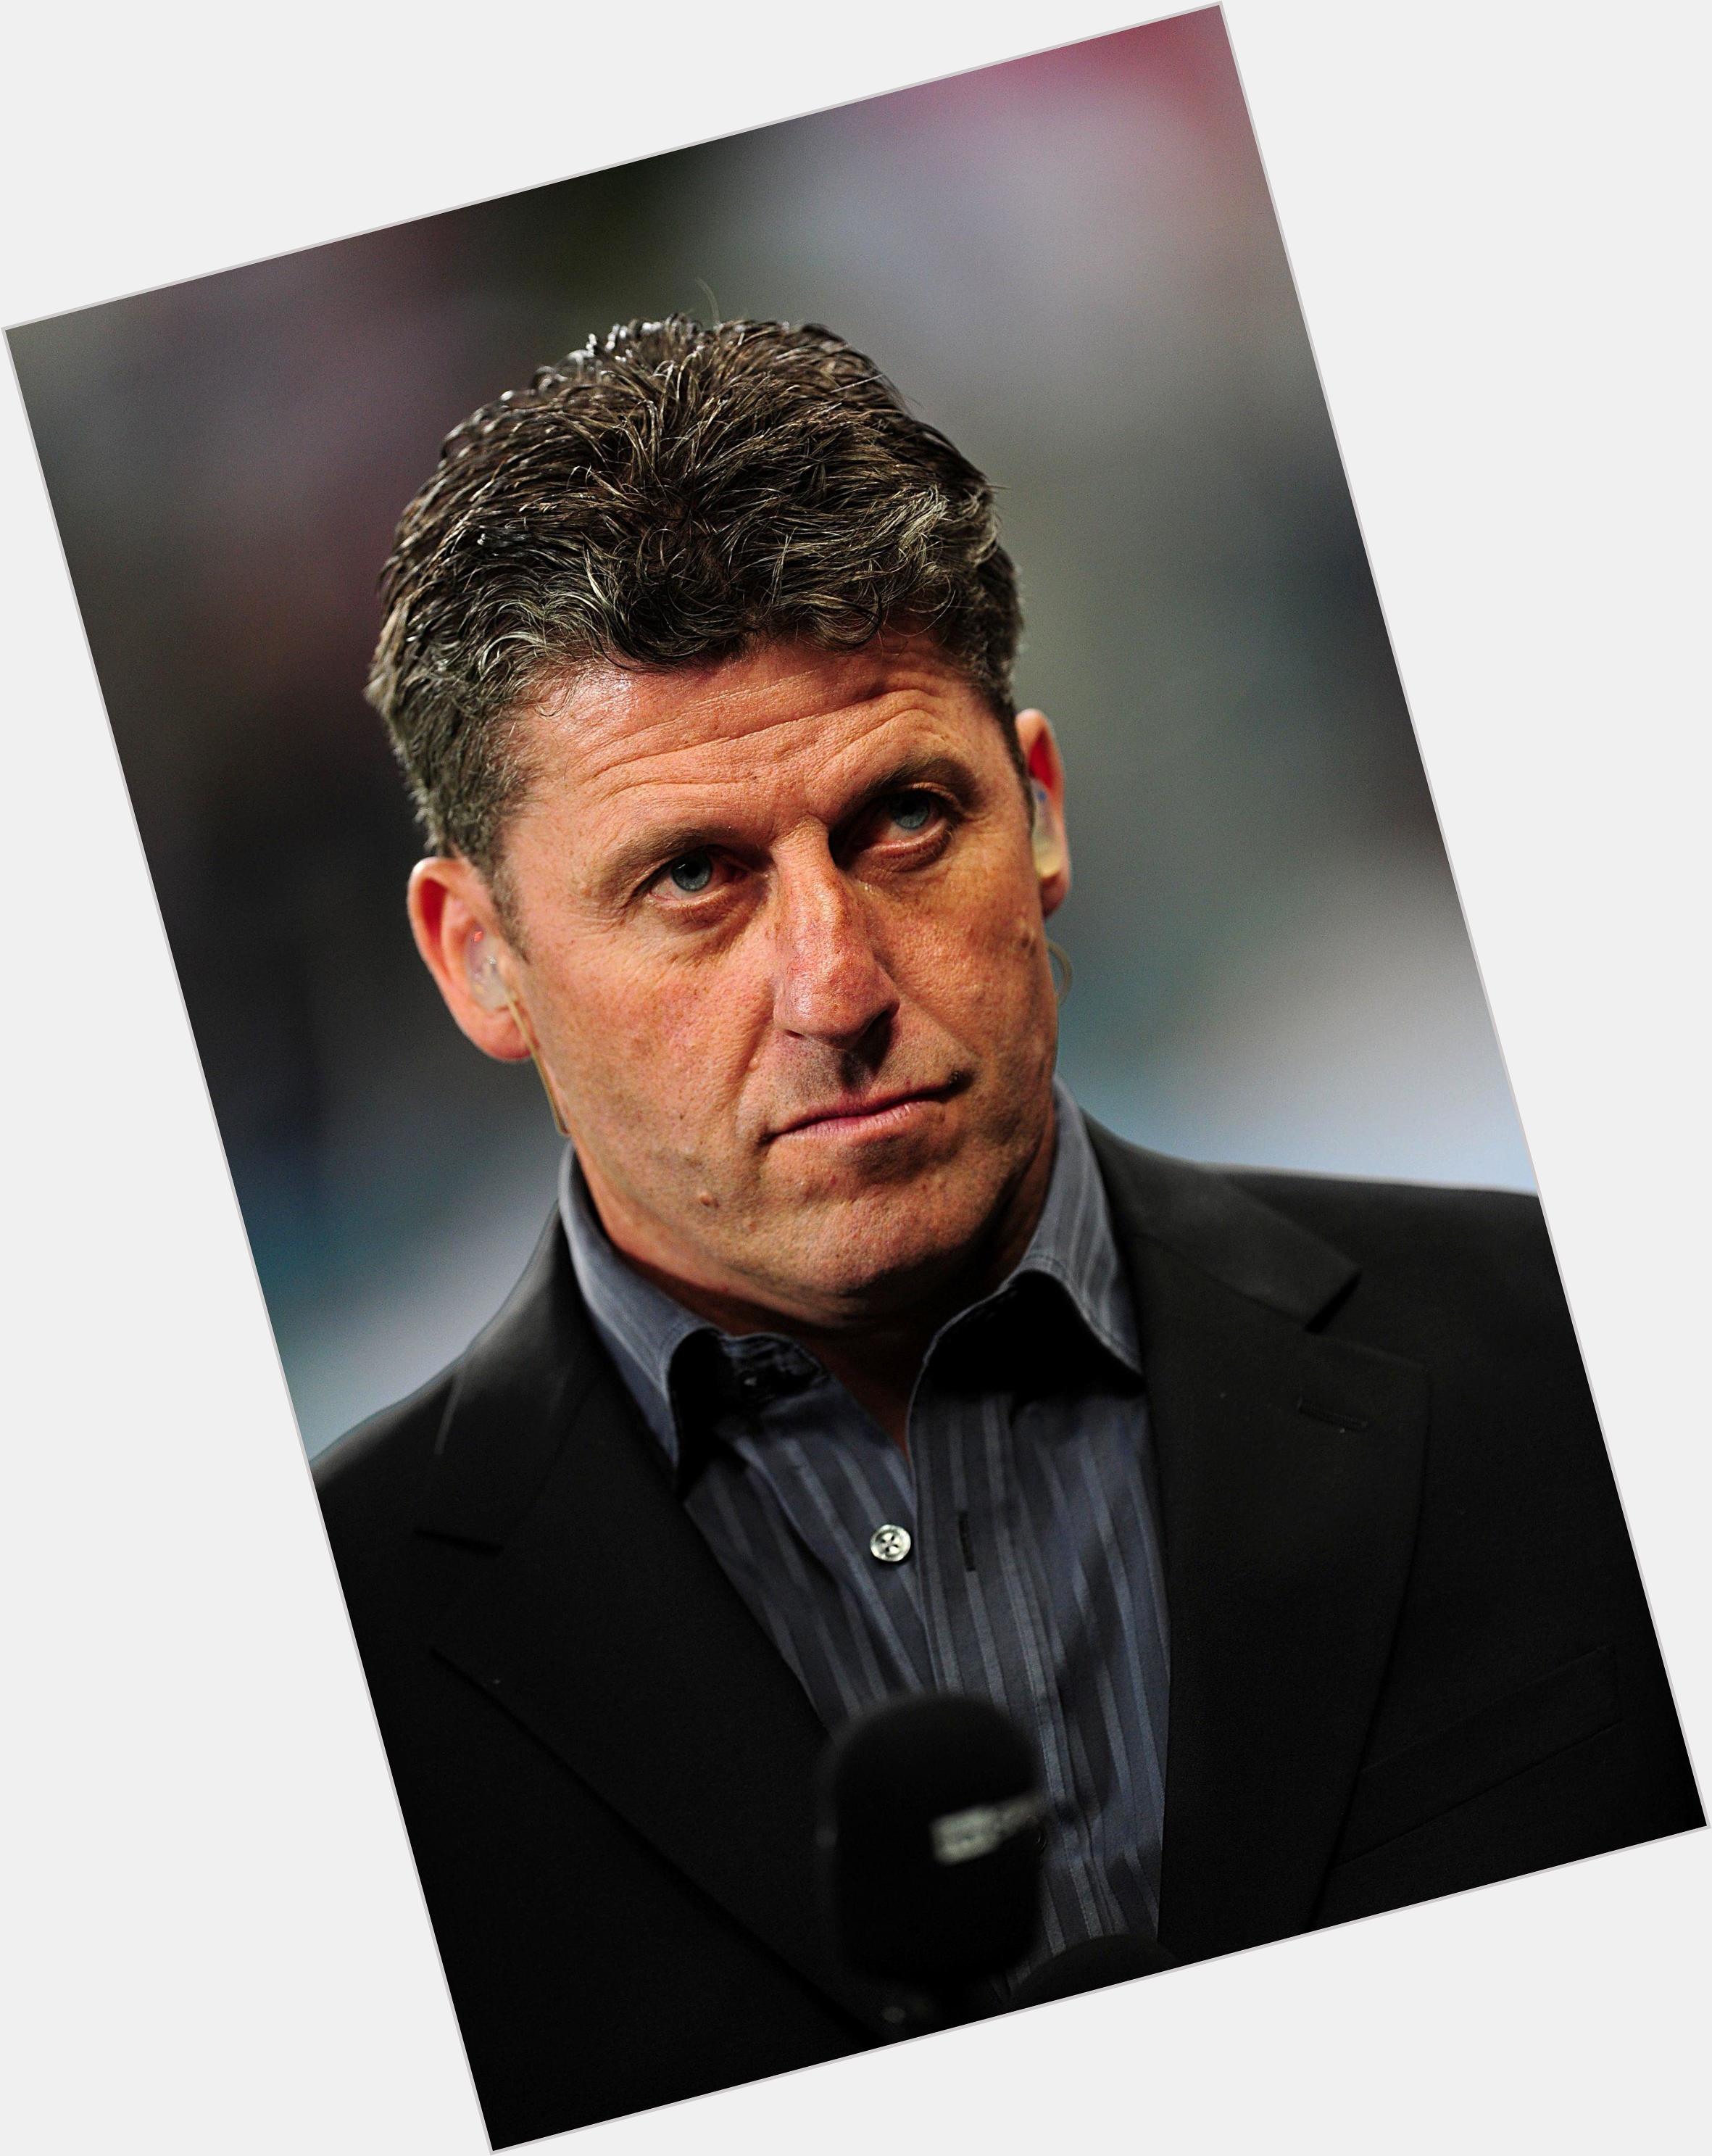 Https://fanpagepress.net/m/A/Andy Townsend New Pic 1